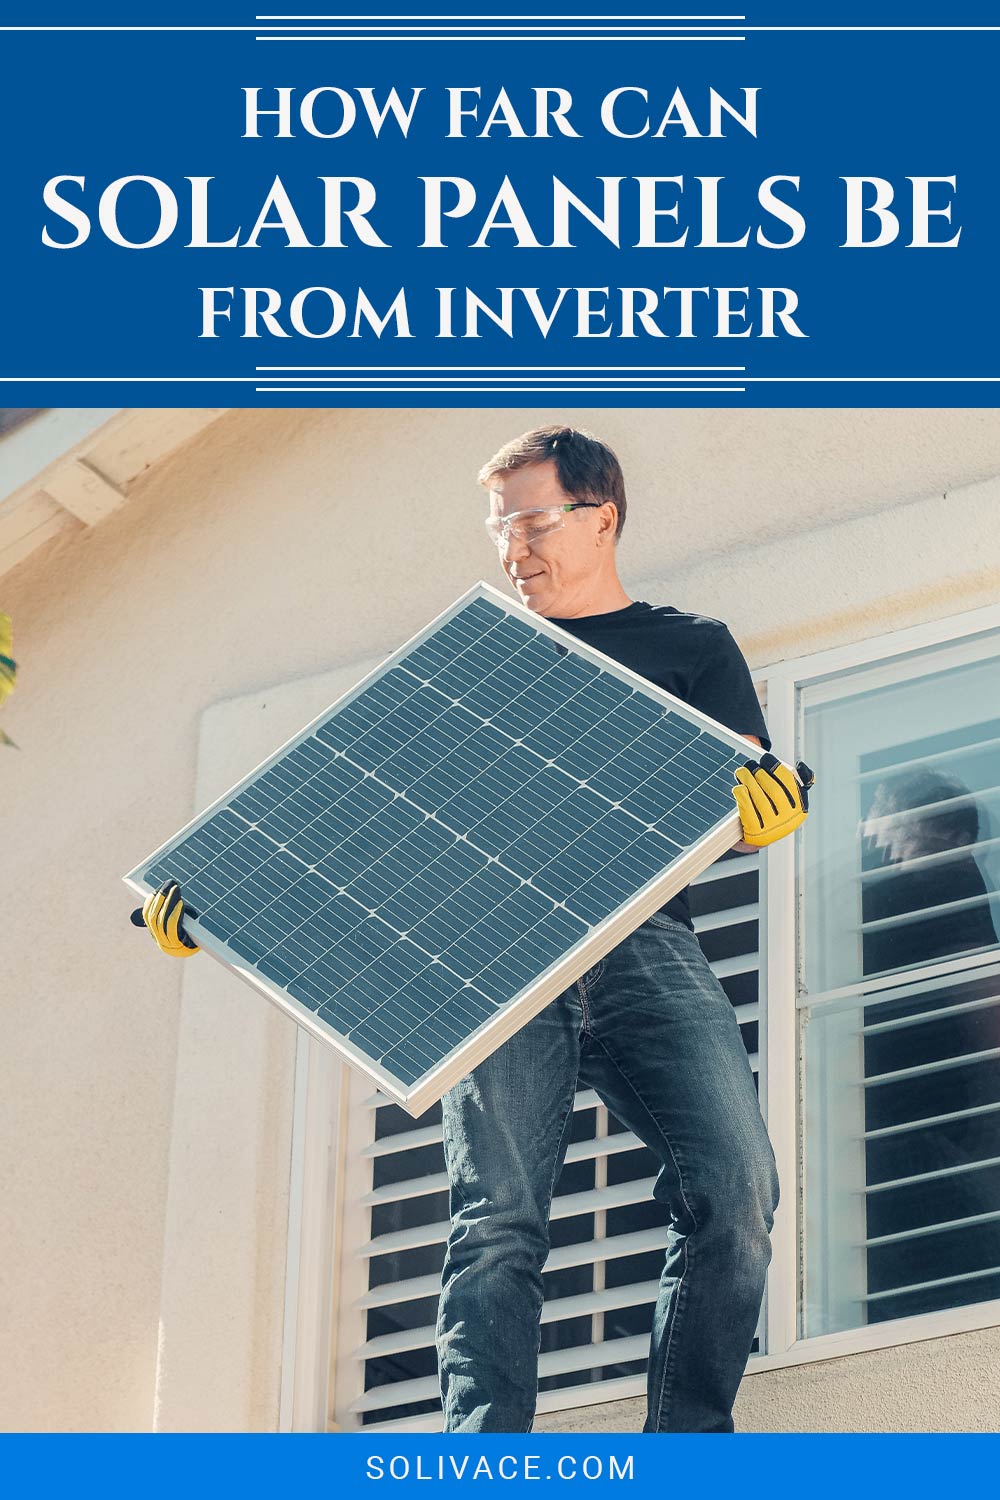 Man holding a solar panel standing near a window - How Far Can Solar Panels Be From Inverter